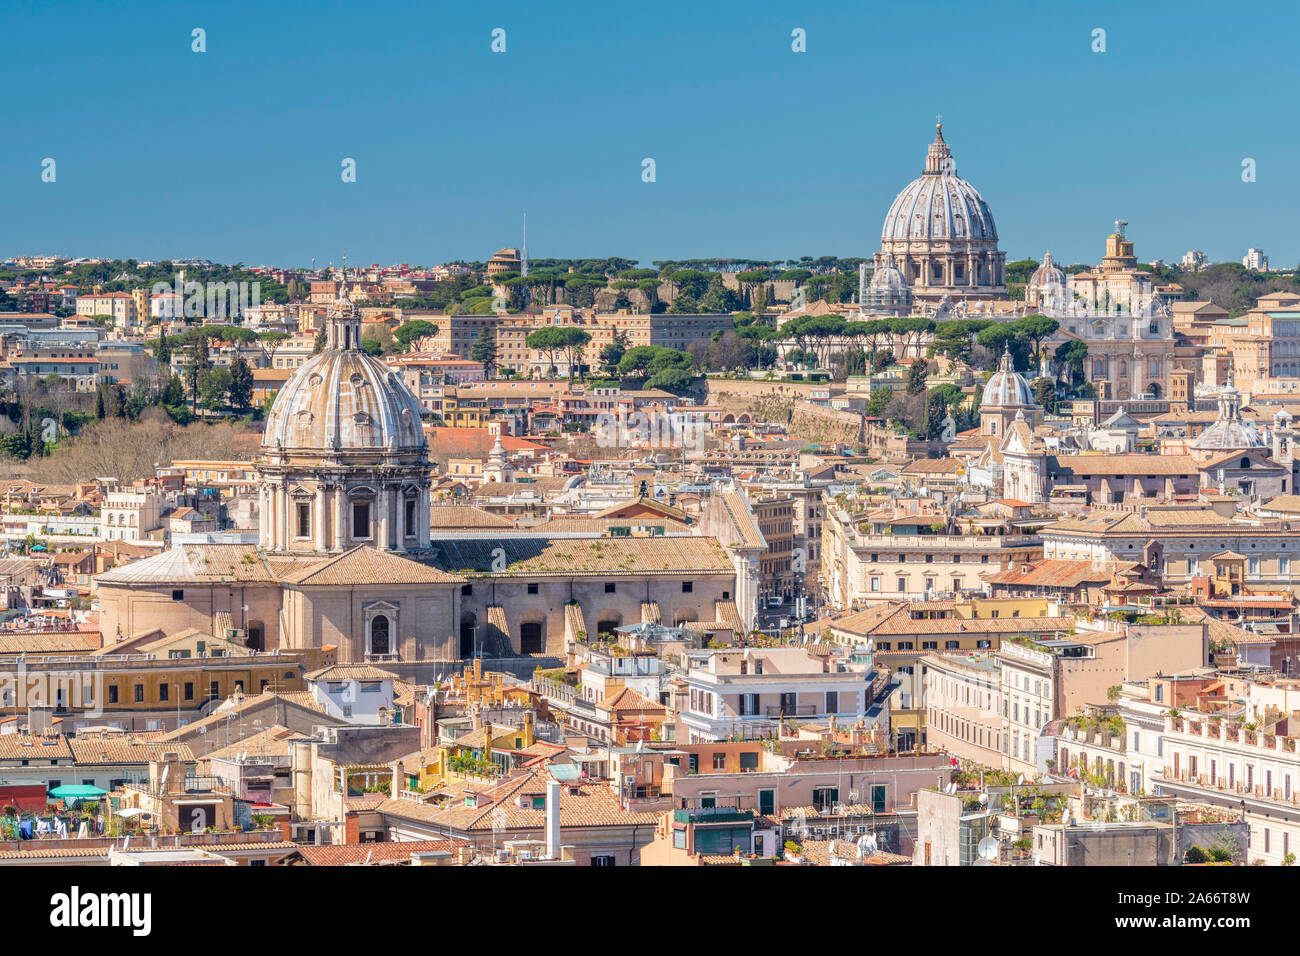 Italy, Lazio, Rome, St Peters Basilica and Rome rooftops Stock Photo